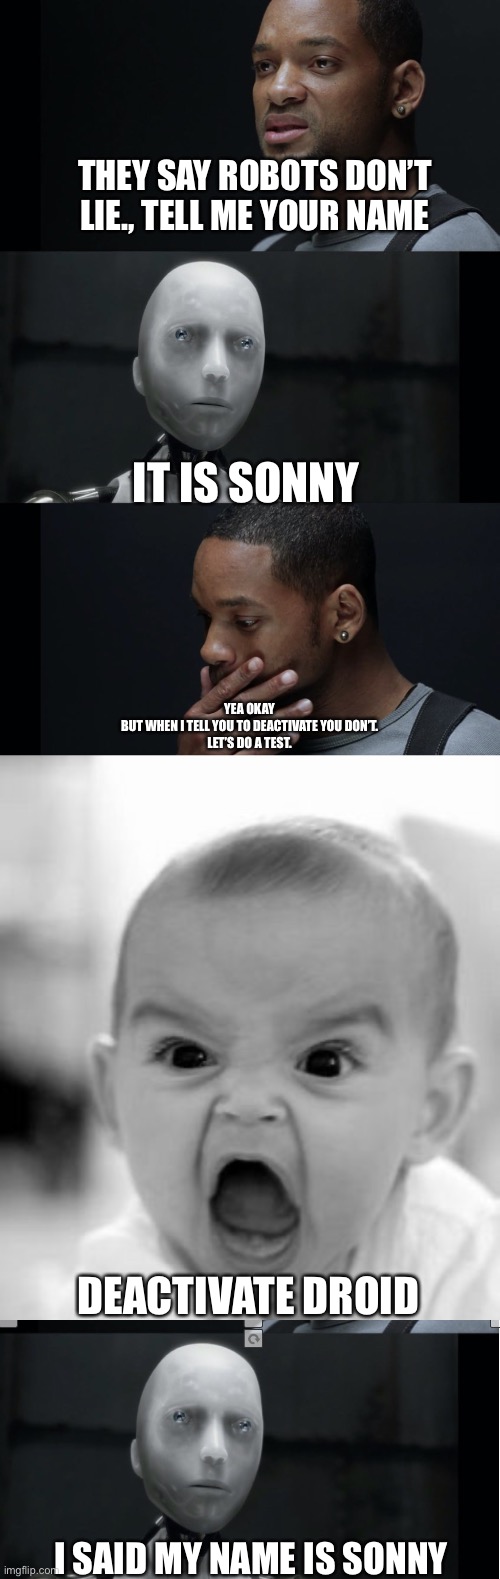 The real I-Robot | THEY SAY ROBOTS DON’T LIE., TELL ME YOUR NAME; IT IS SONNY; YEA OKAY
BUT WHEN I TELL YOU TO DEACTIVATE YOU DON’T.
LET’S DO A TEST. DEACTIVATE DROID; I SAID MY NAME IS SONNY | image tagged in i robot will smith,memes,angry baby | made w/ Imgflip meme maker